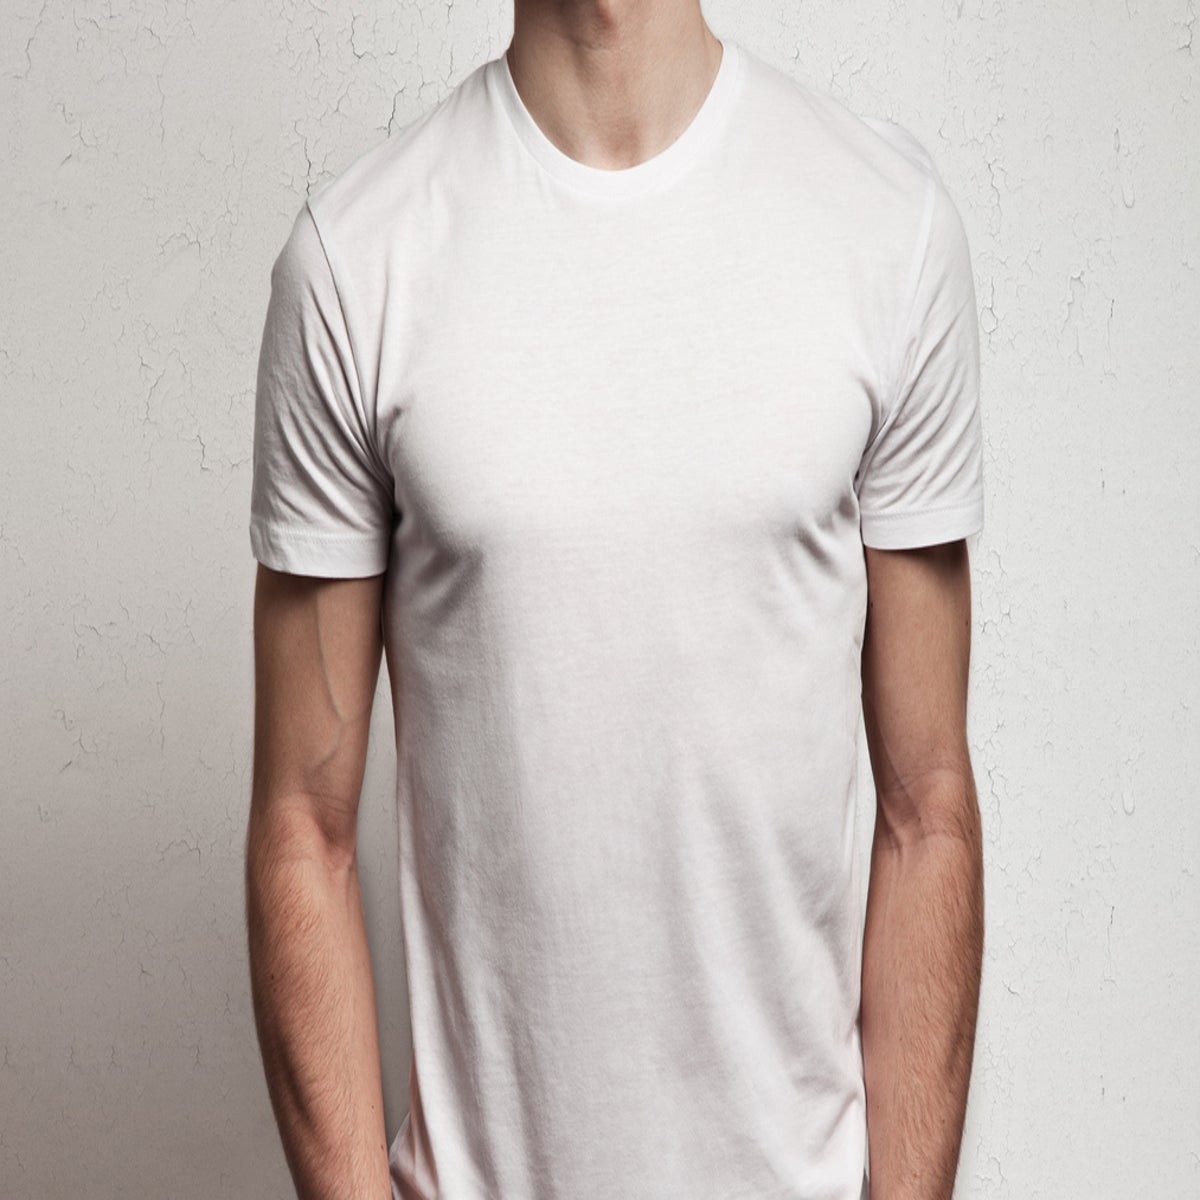 The most popular T-shirt on the internet costs just £6 | The The